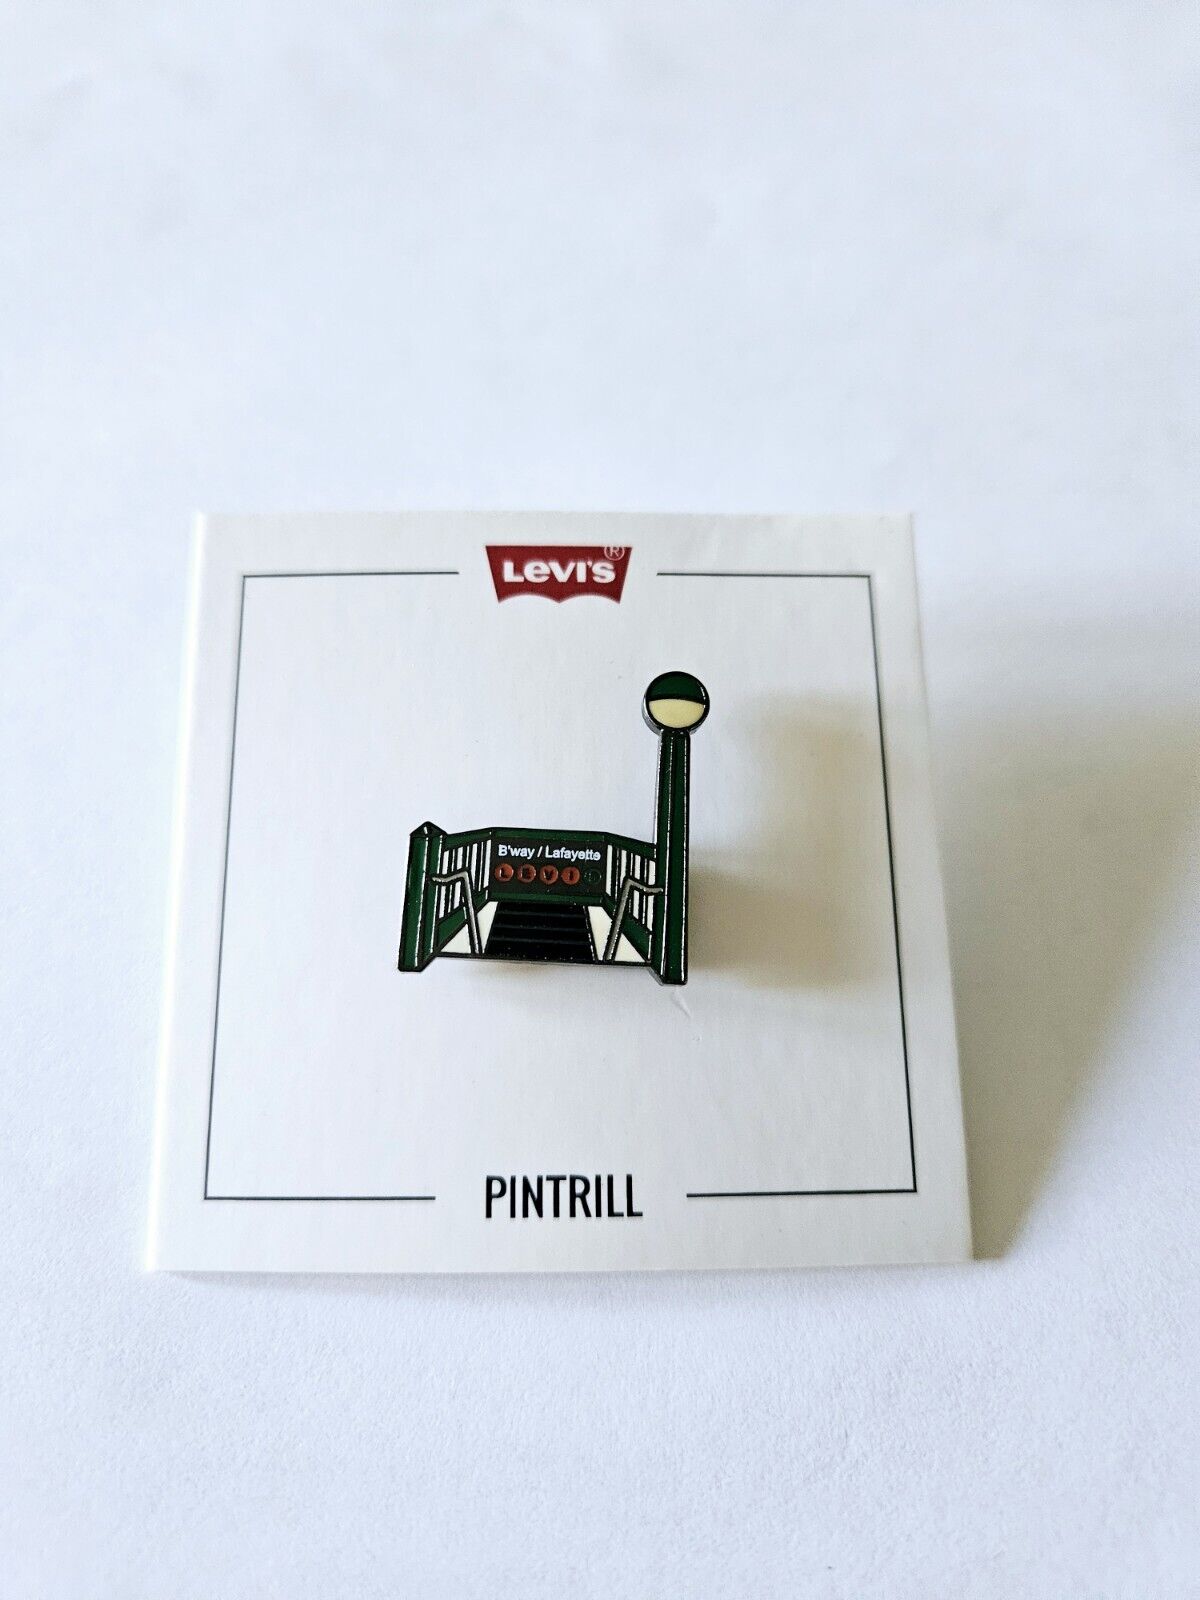 ⚡RARE⚡ PINTRILL x LEVI\'S  *BRAND NEW SEALED* LIMITED EDITION